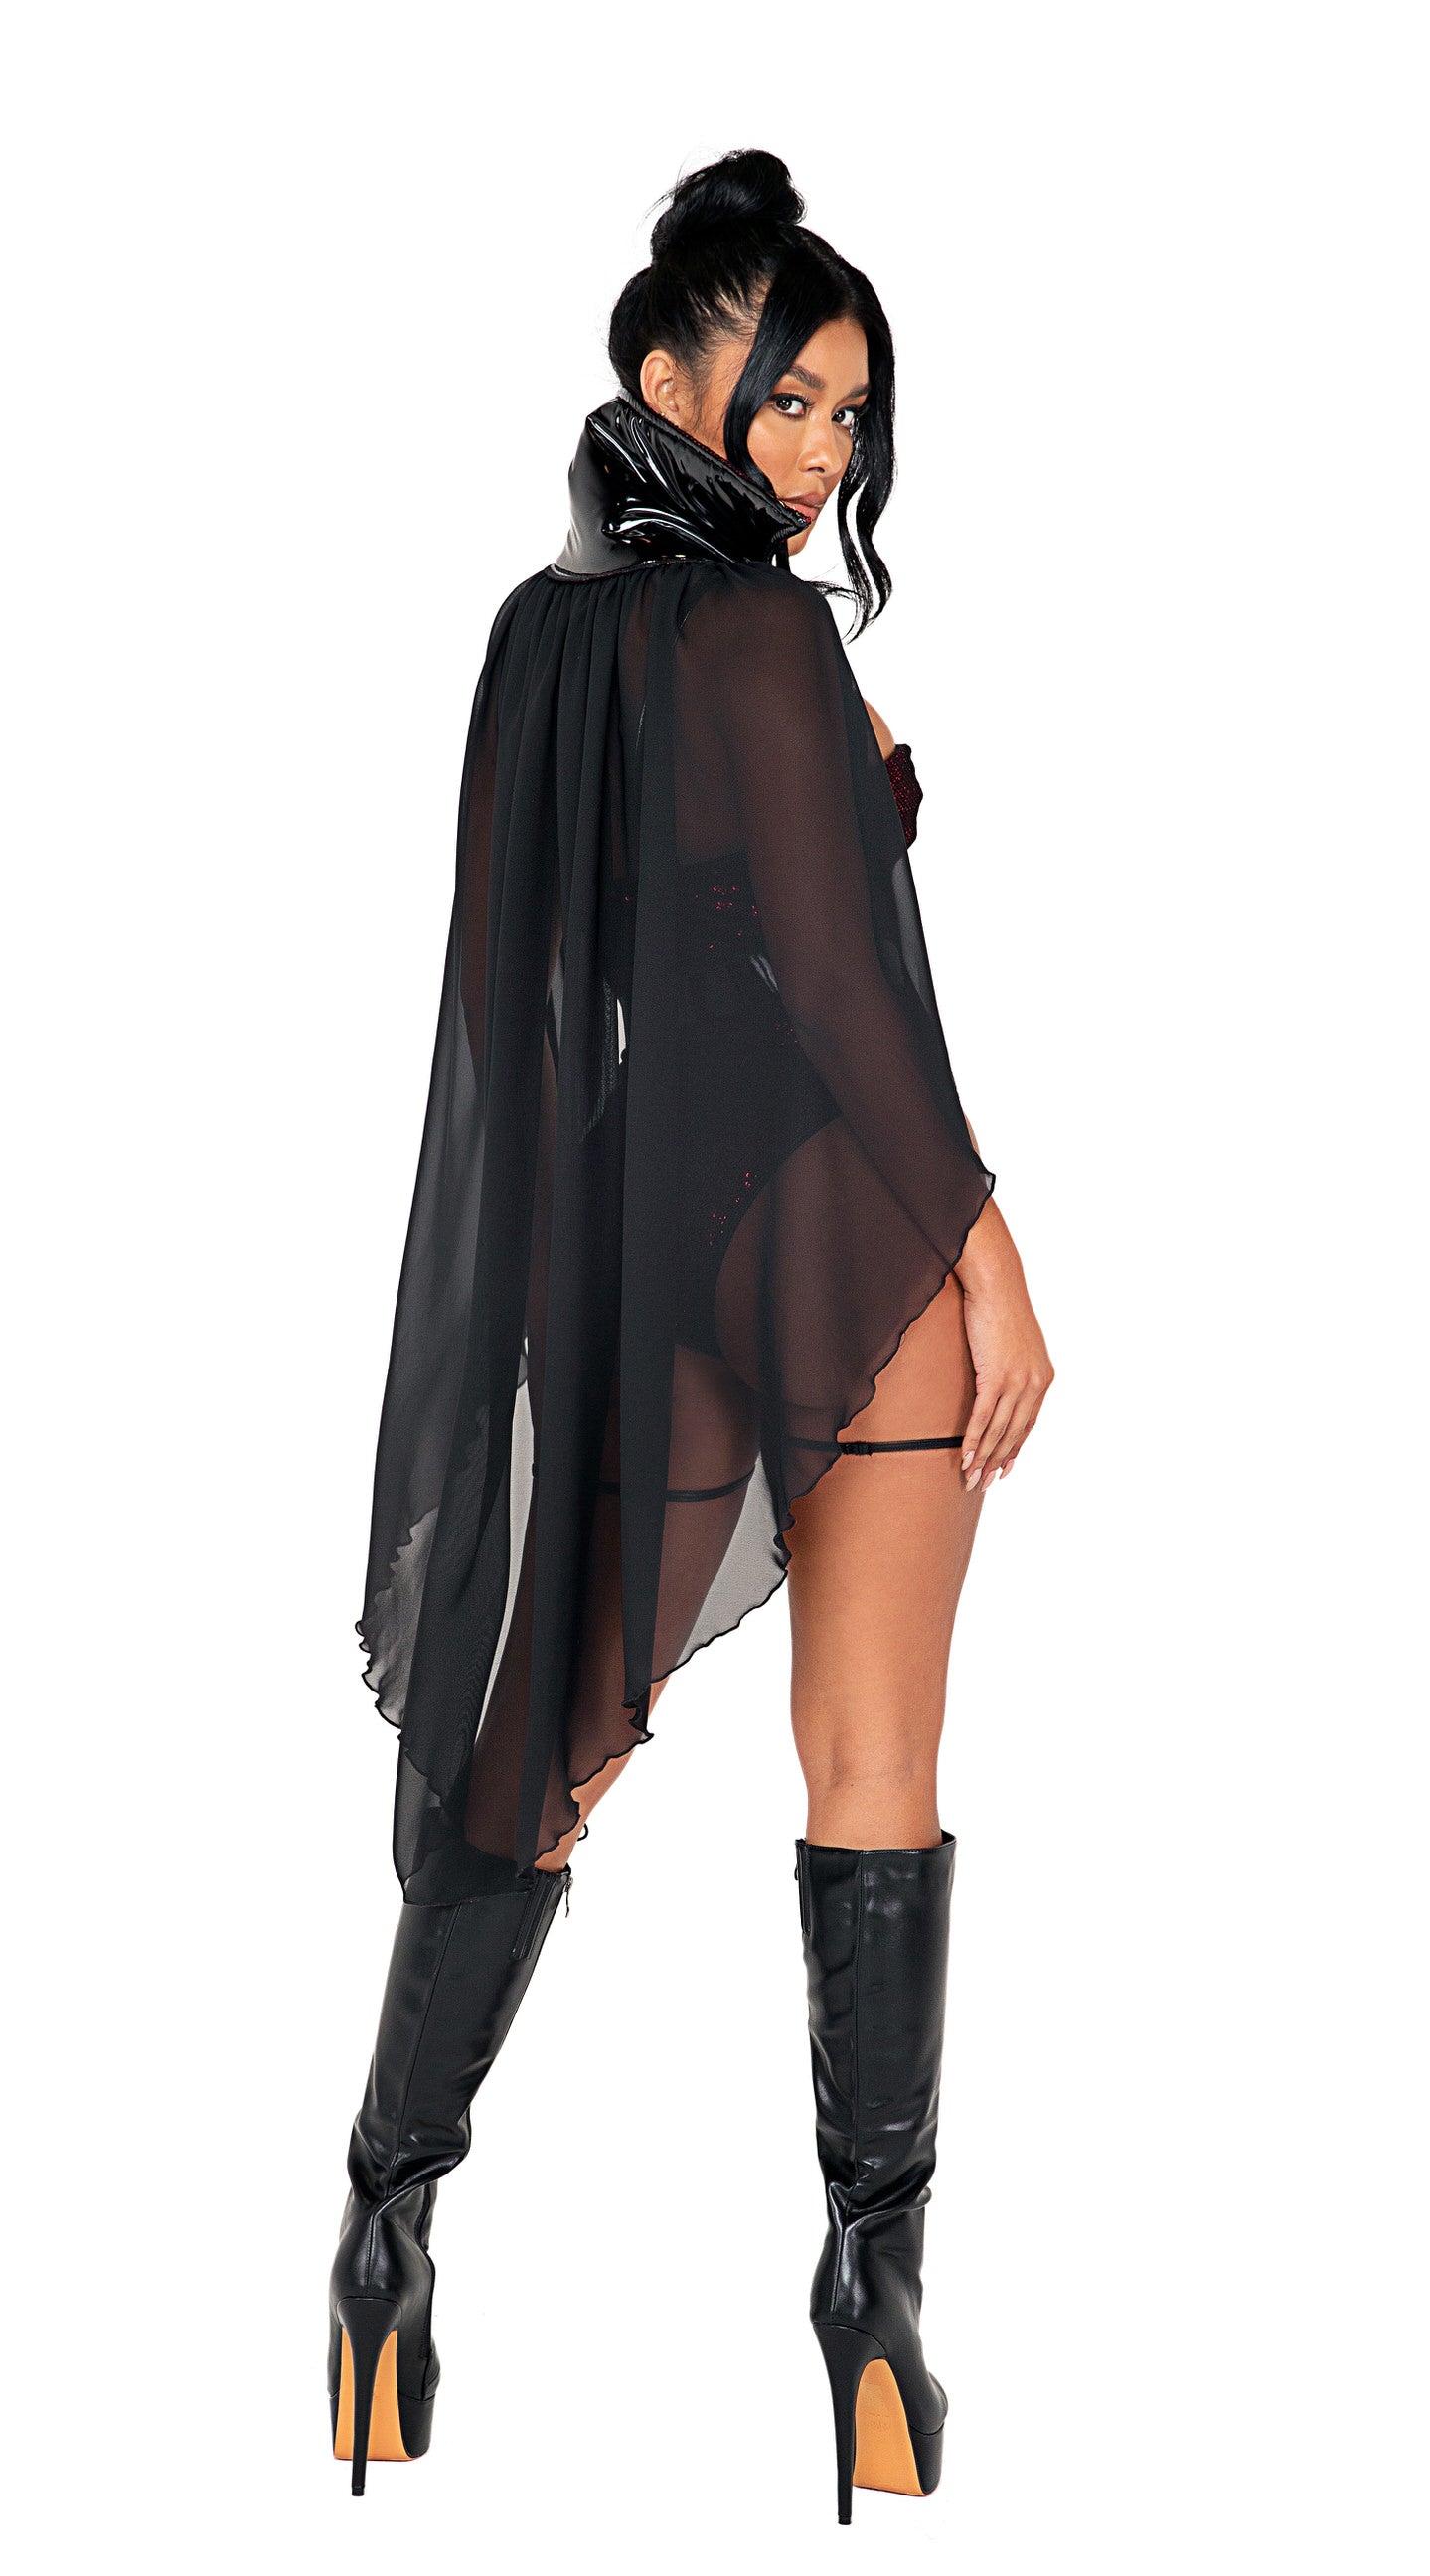 The Underworld Vampire Costume by ROMA in Size S, M, or L